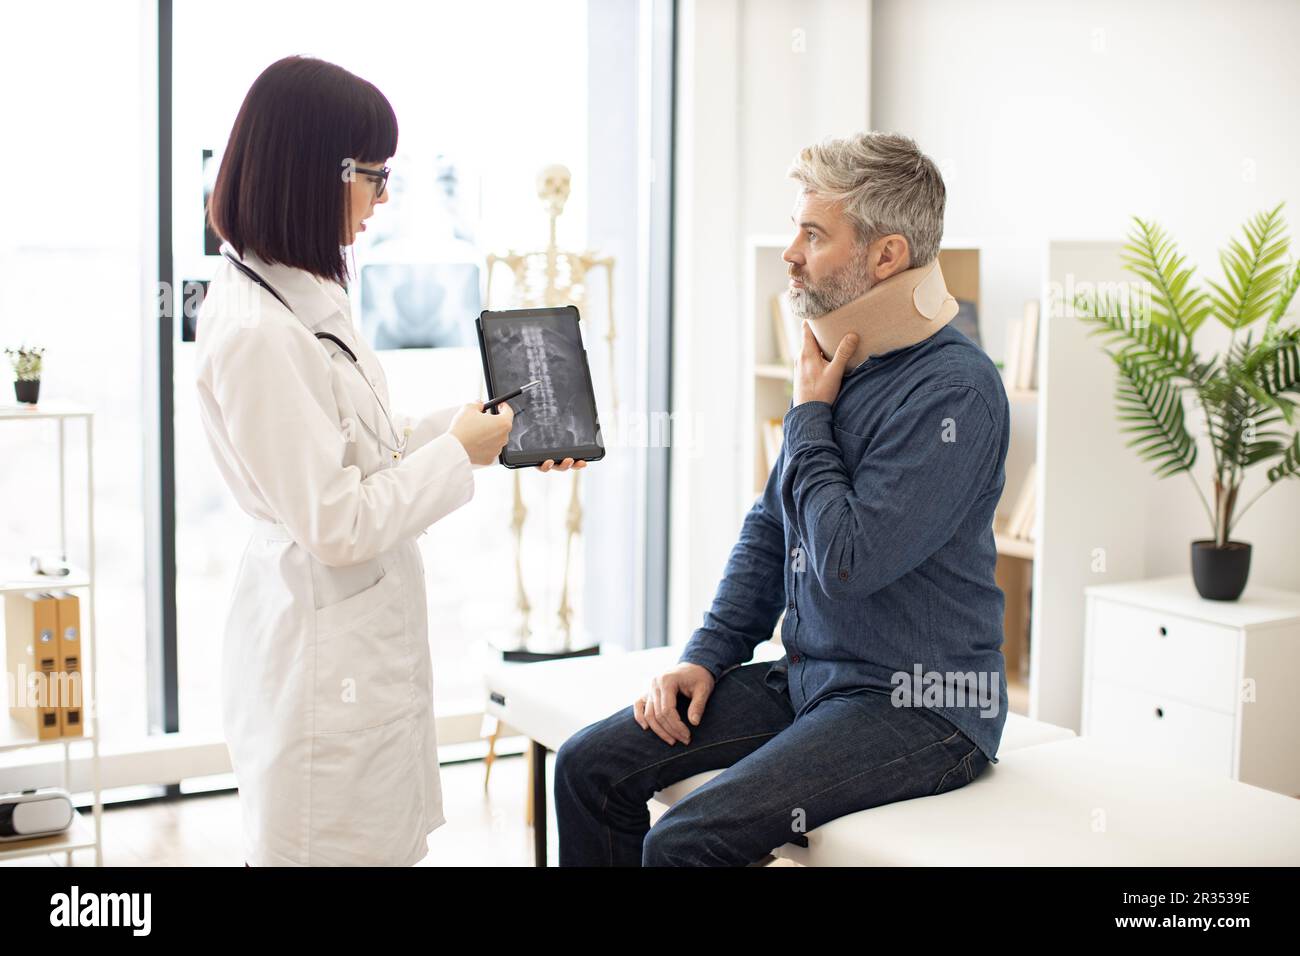 Caucasian lady holding tablet with CT scan image on screen while talking to male in neck brace sitting on exam couch. Young orthopedist analyzing thoracic vertebrae on digital report in clinic. Stock Photo